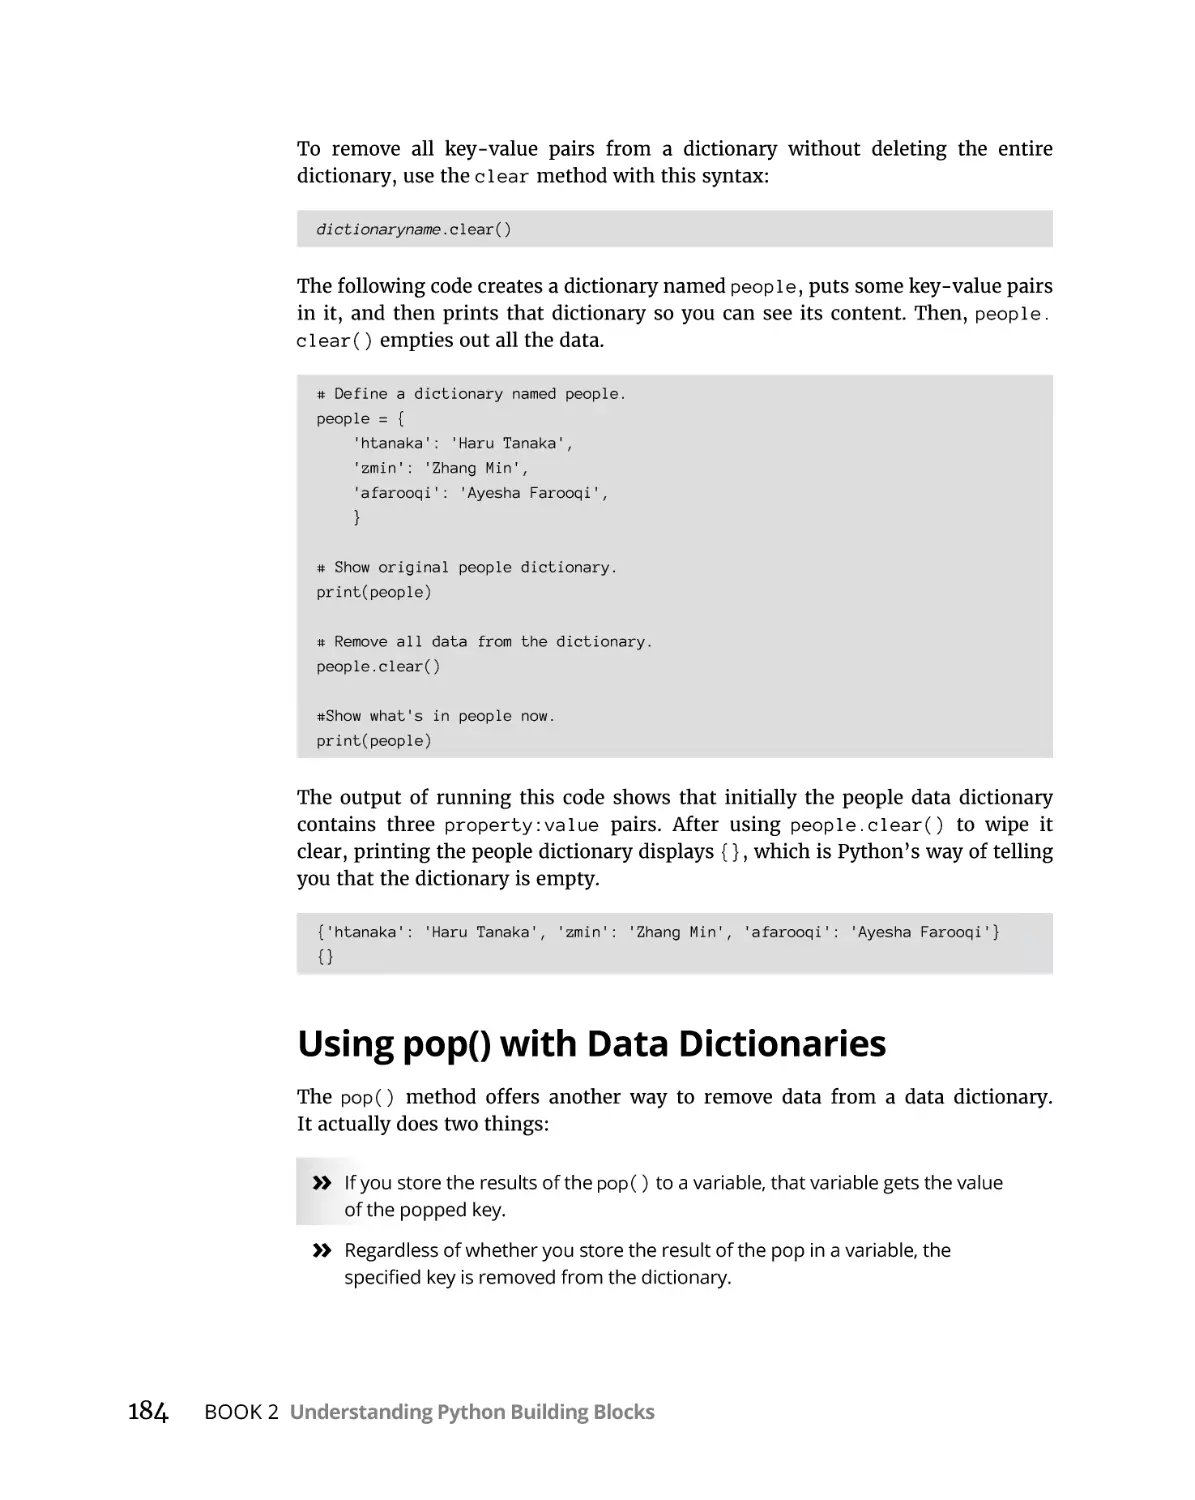 Using pop() with Data Dictionaries